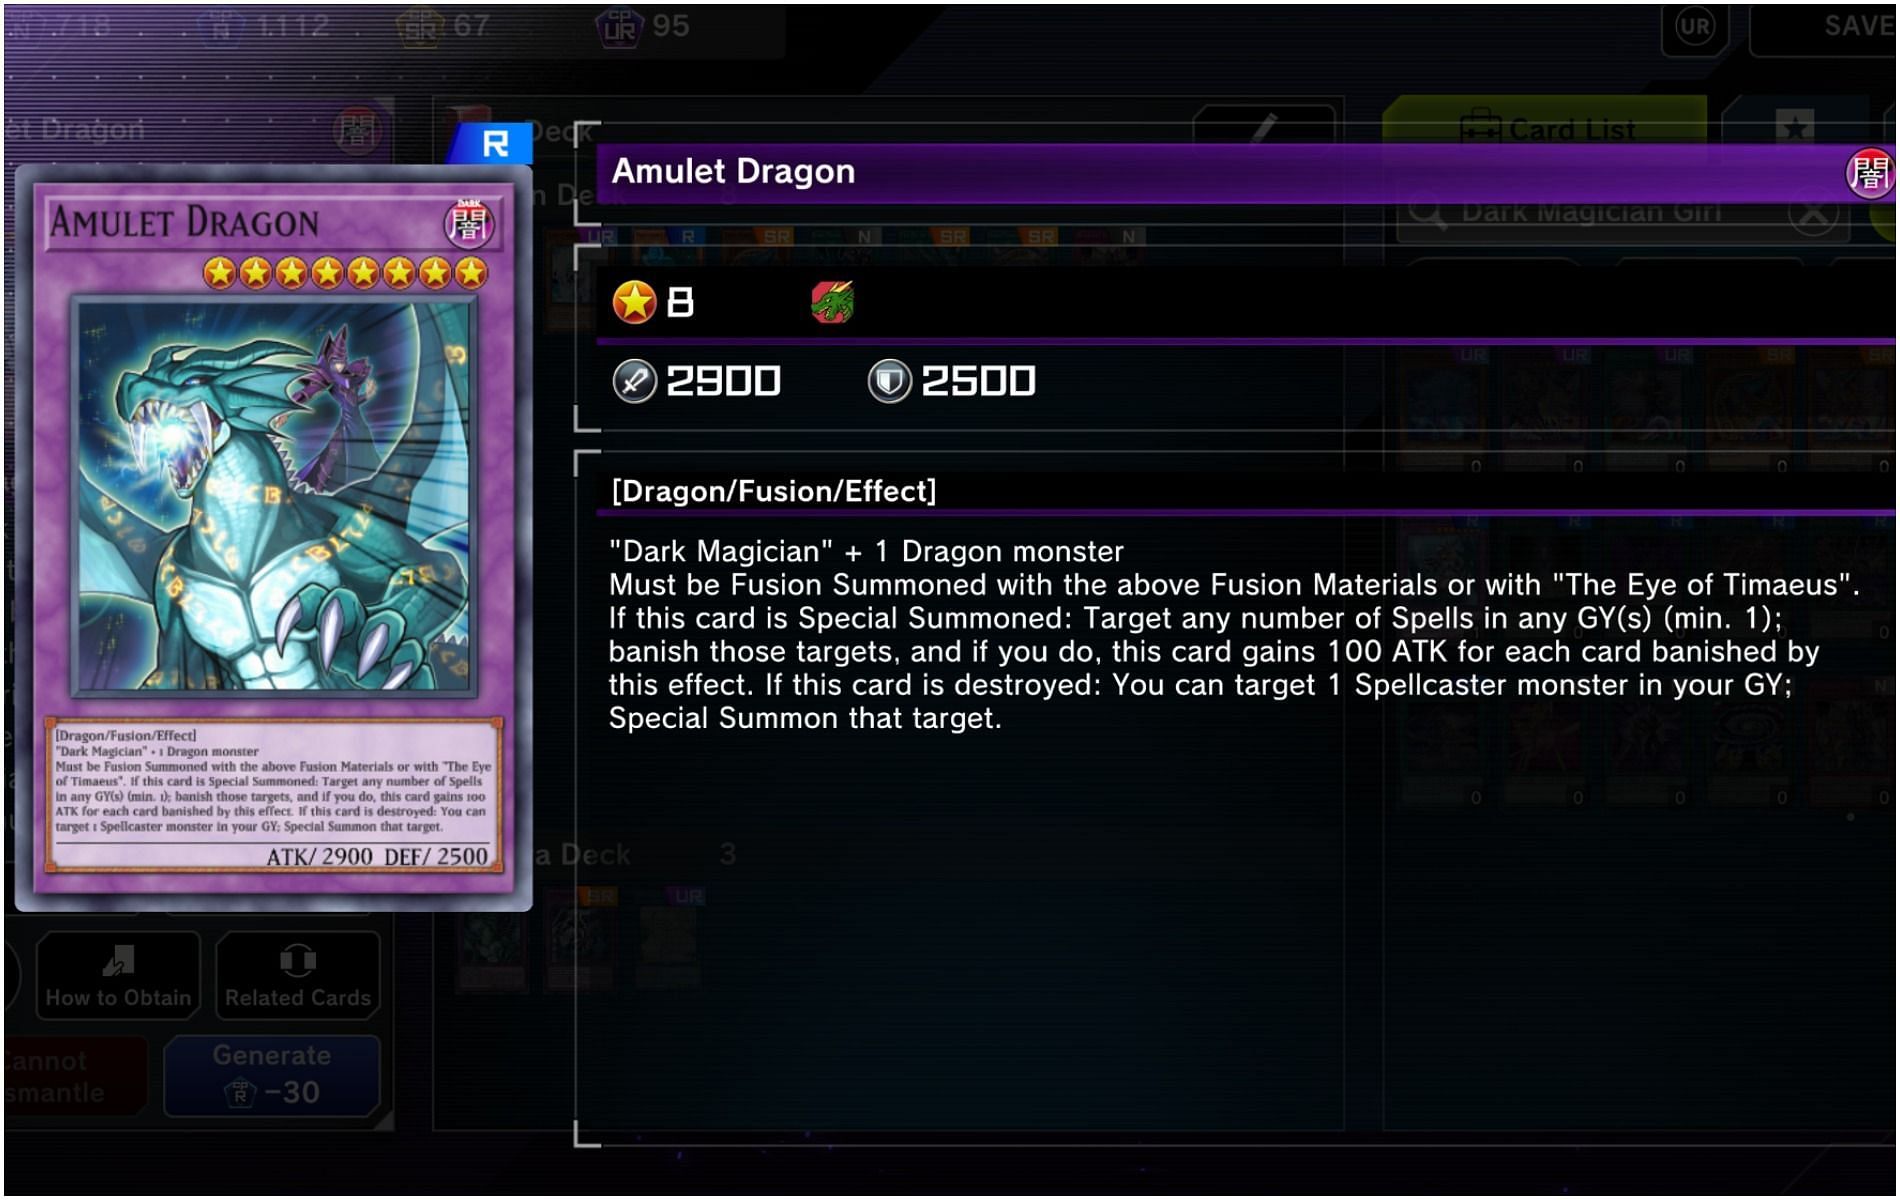 Depending on how the game has shaken out, Amulet Dragon can be the key to Yu-Gi-Oh! Master Duel victory (Image via Konami)